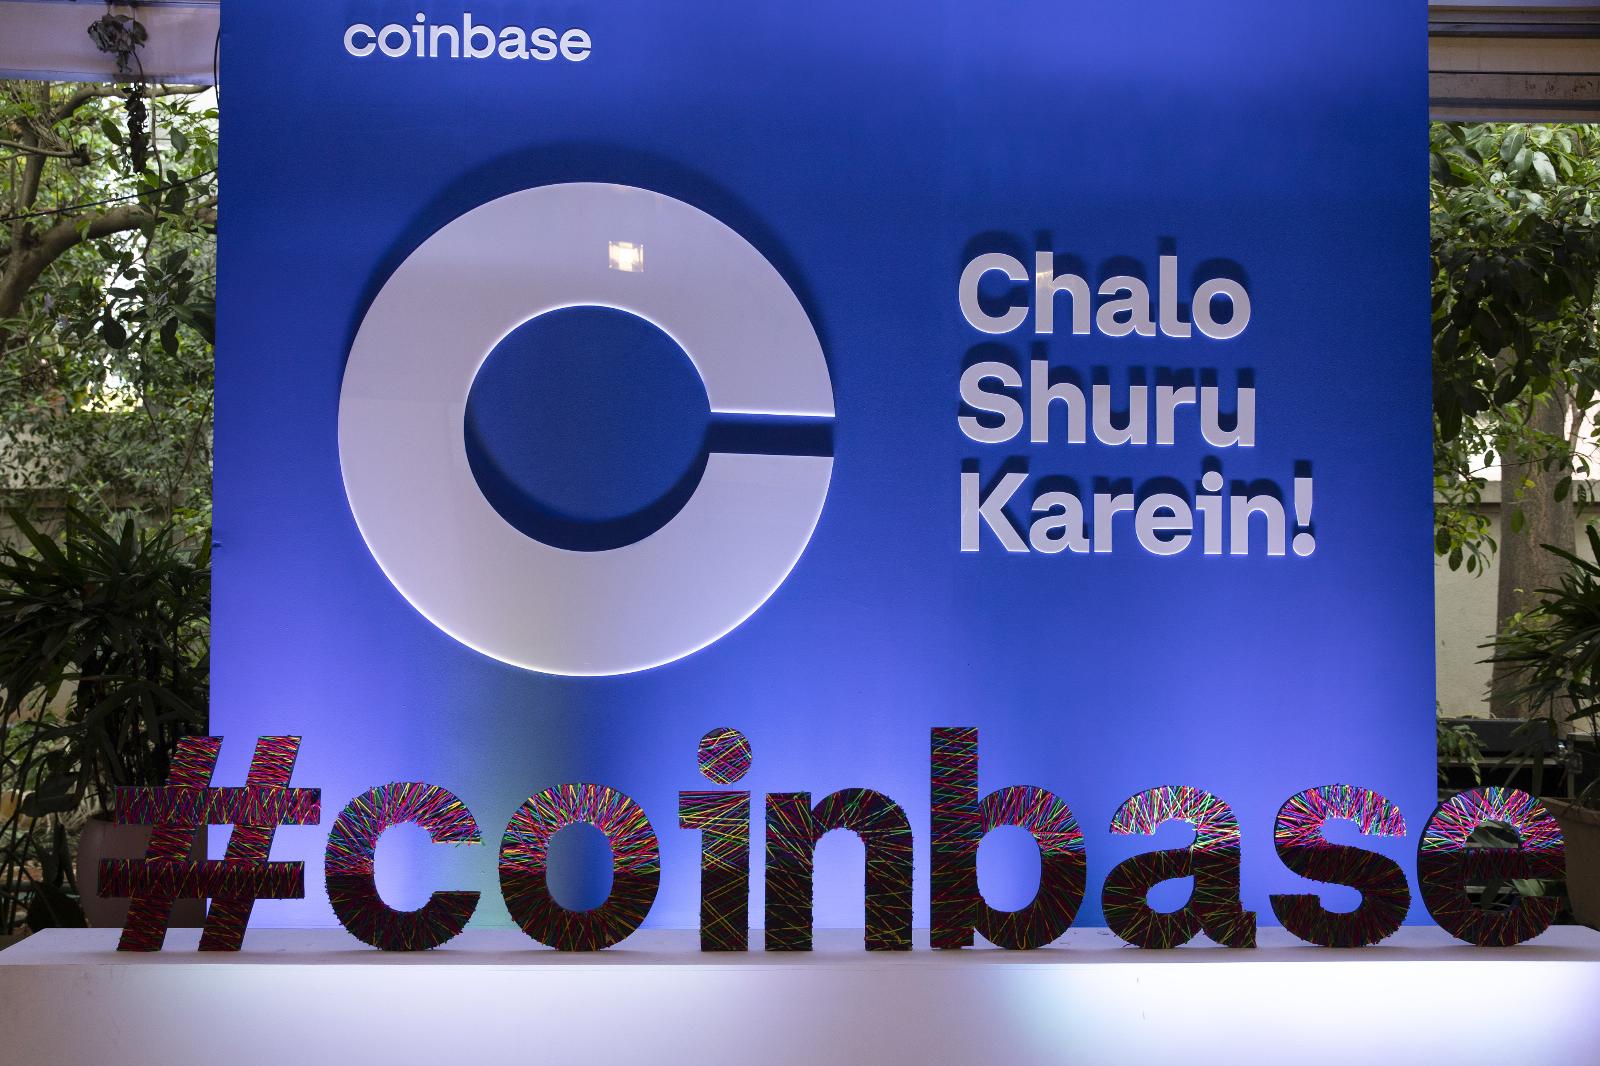 Coinbase to discontinue services in India later this month